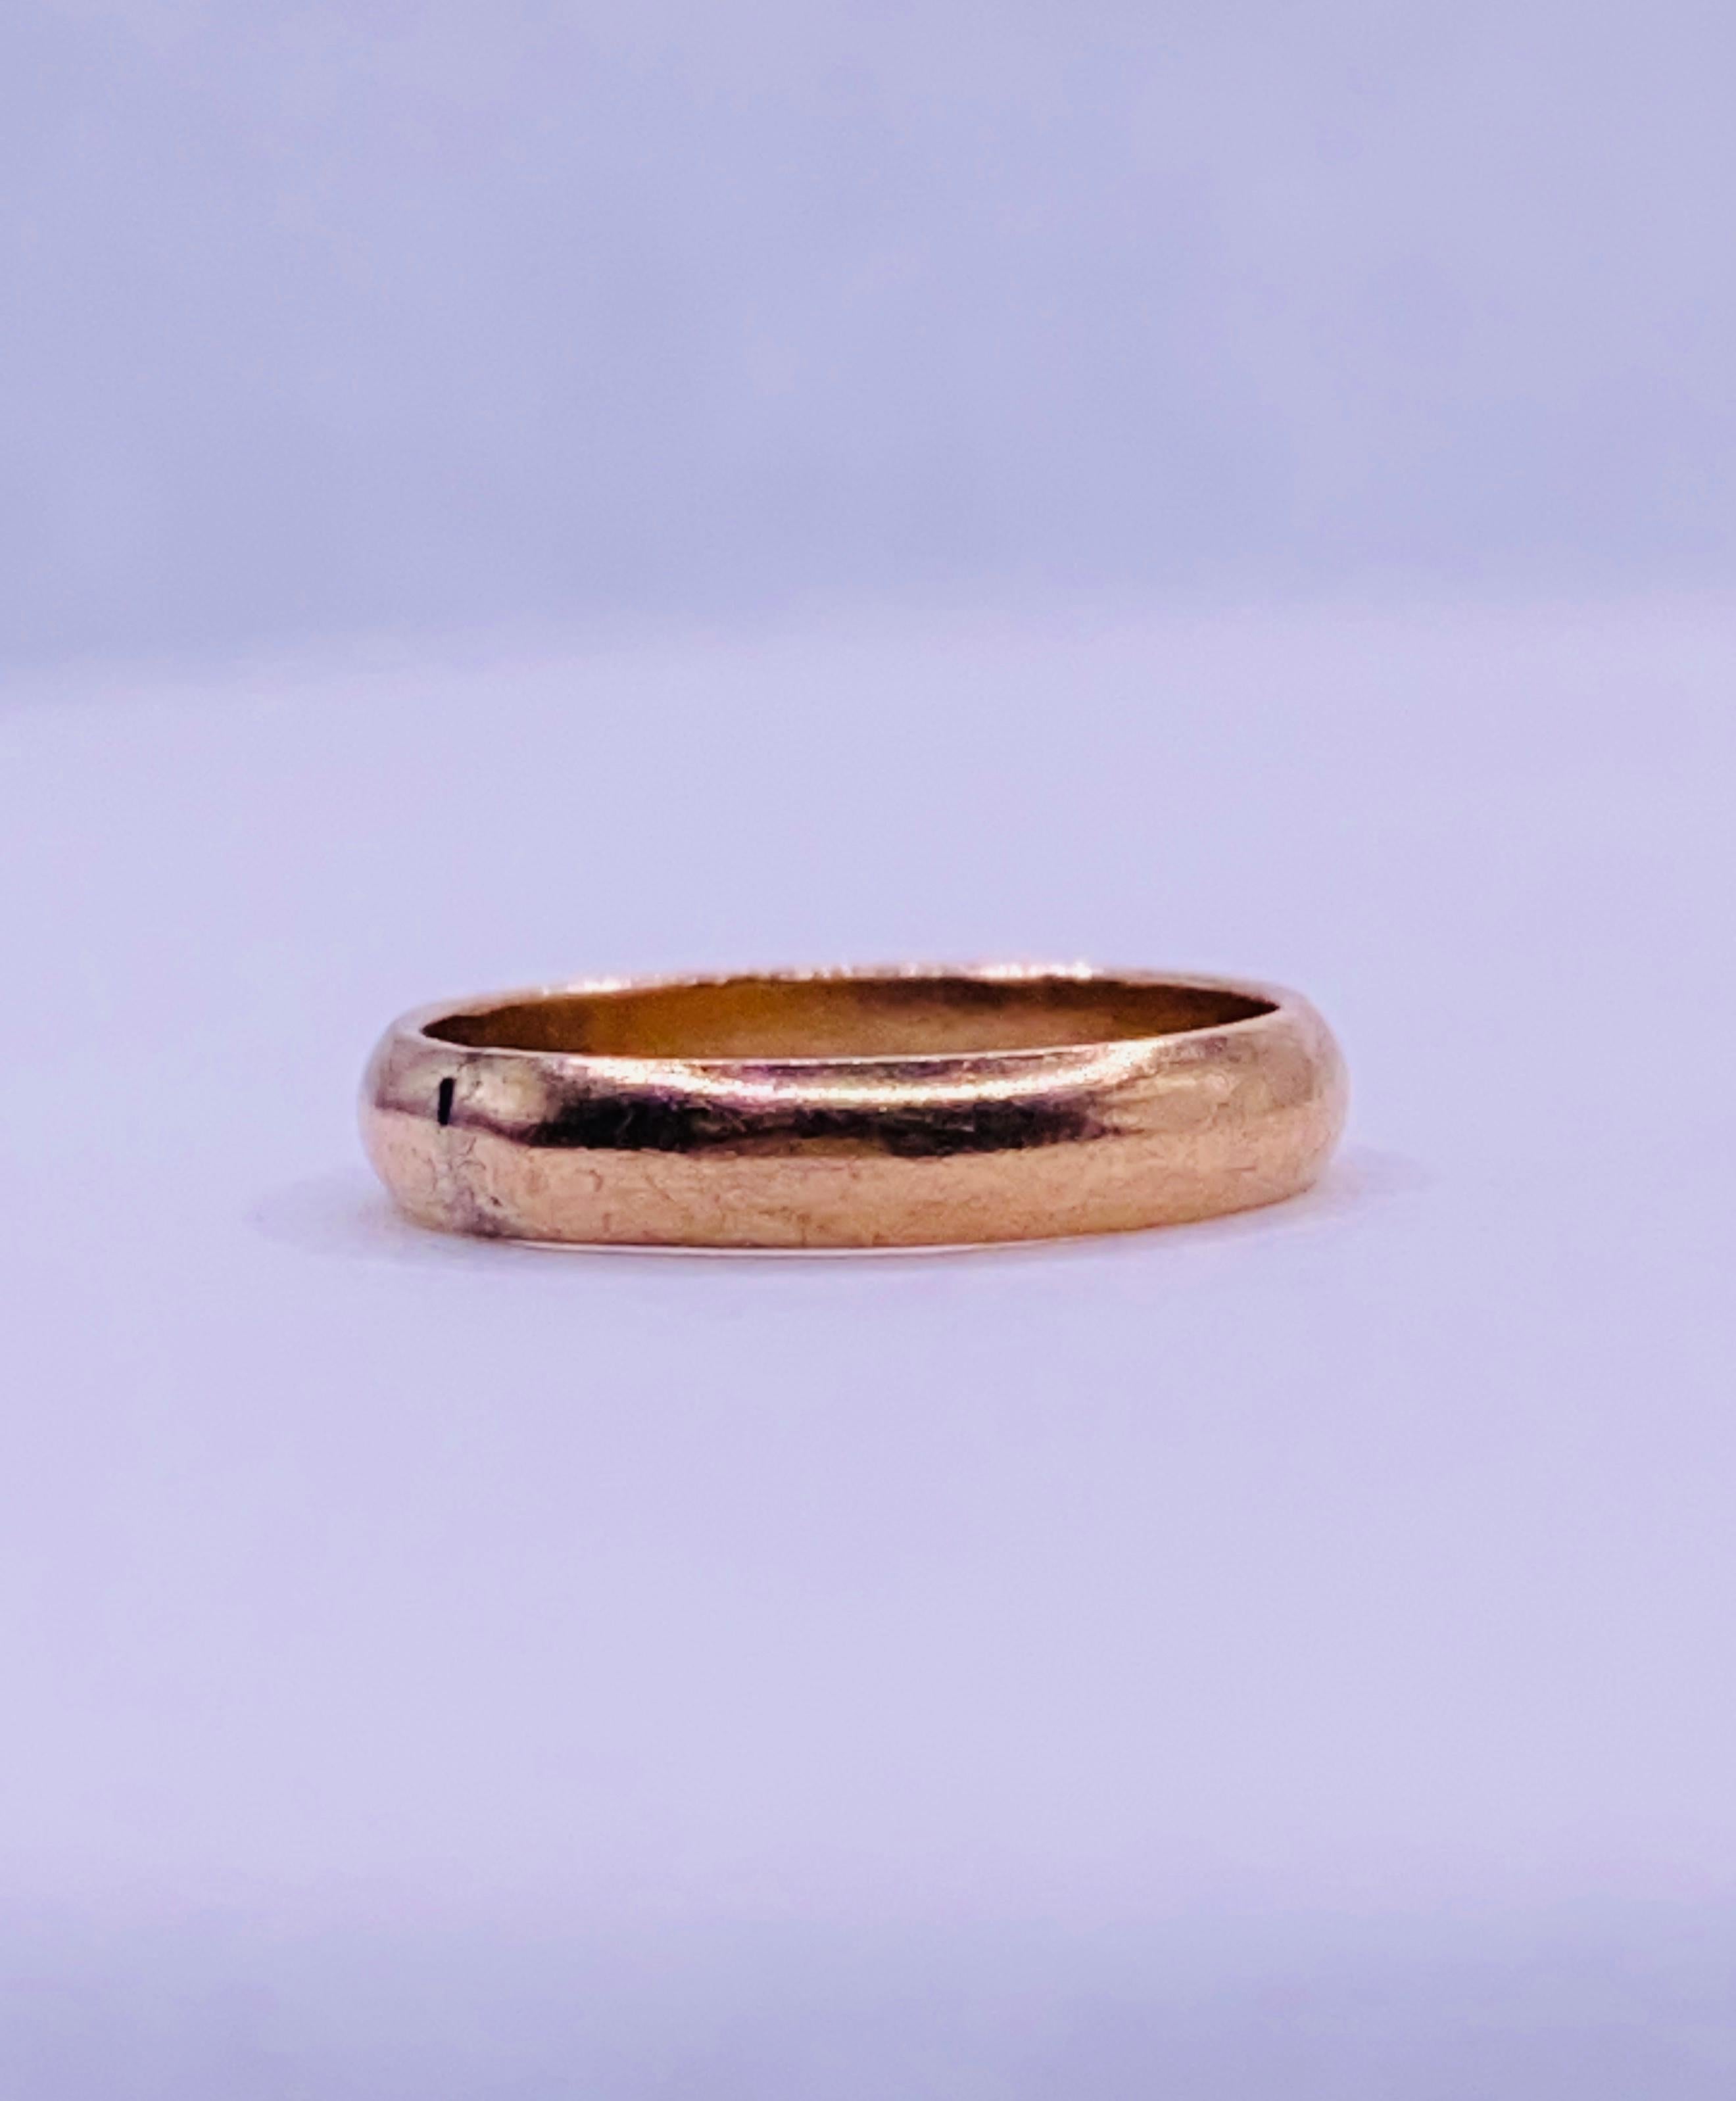 Antique Infant Baby 12k Yellow Gold Band Ring 0.4Dwt NOTE: This ring is a size 0 - please see photo of ring compared to a dime for reference. 